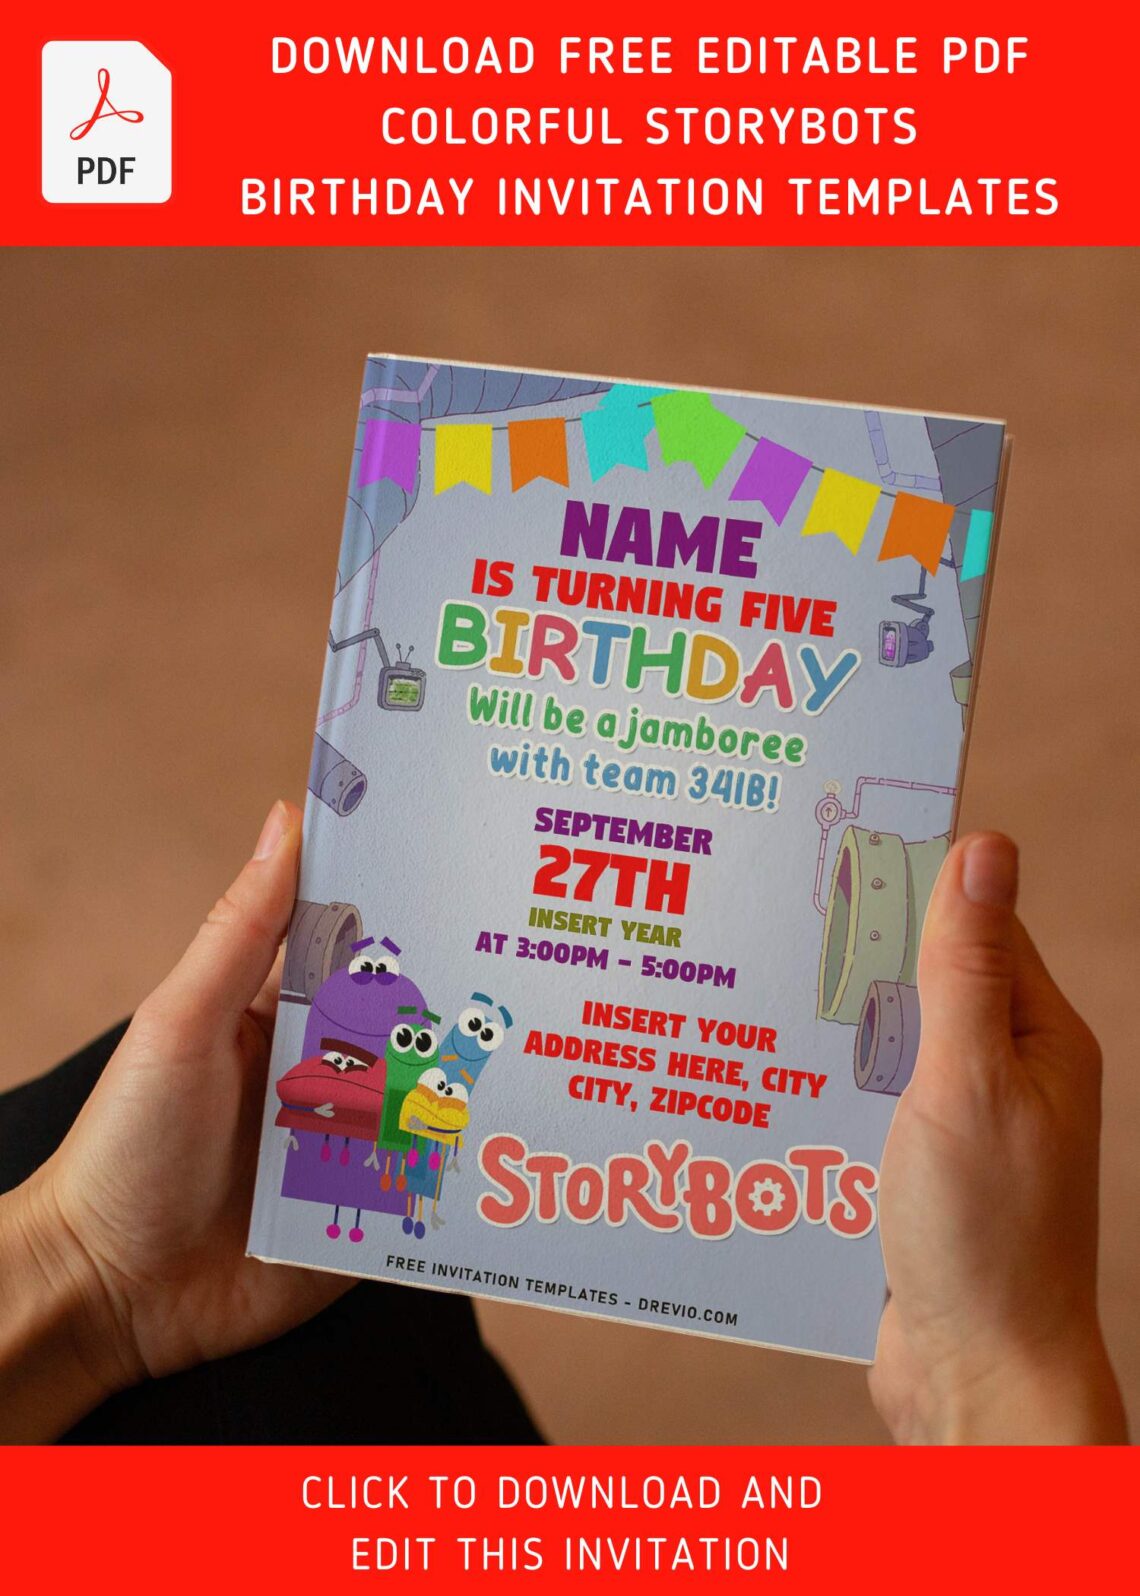 (Free Editable PDF) Friendly And Funny StoryBots Birthday Invitation Templates with colorful bunting flags